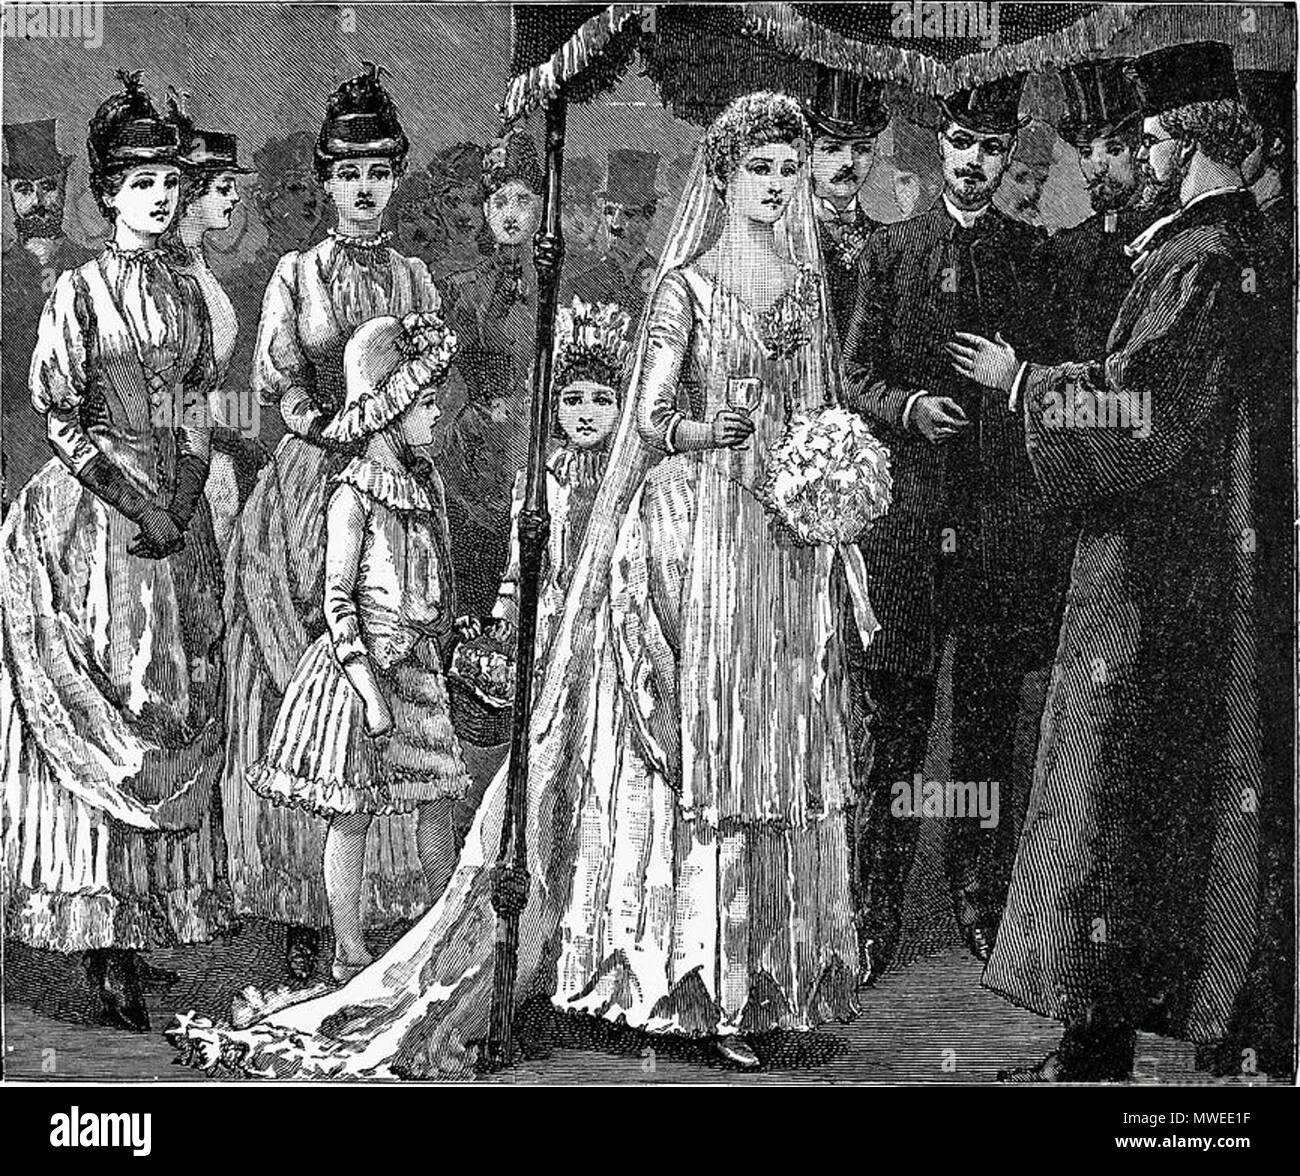 . English: Jewish marriage ceremony c 1892. Original Source: From John Clark Ridpath: Ridpath's universal history: an account of the origin, primitive condition, and race development of the greater division of mankind. (New York : Merrill & Baker, c1899). 1892. R. Taylor (1870-1900); Charles Henry Granger (1812-93) 315 Jewish-wedding-c1892-granger Stock Photo